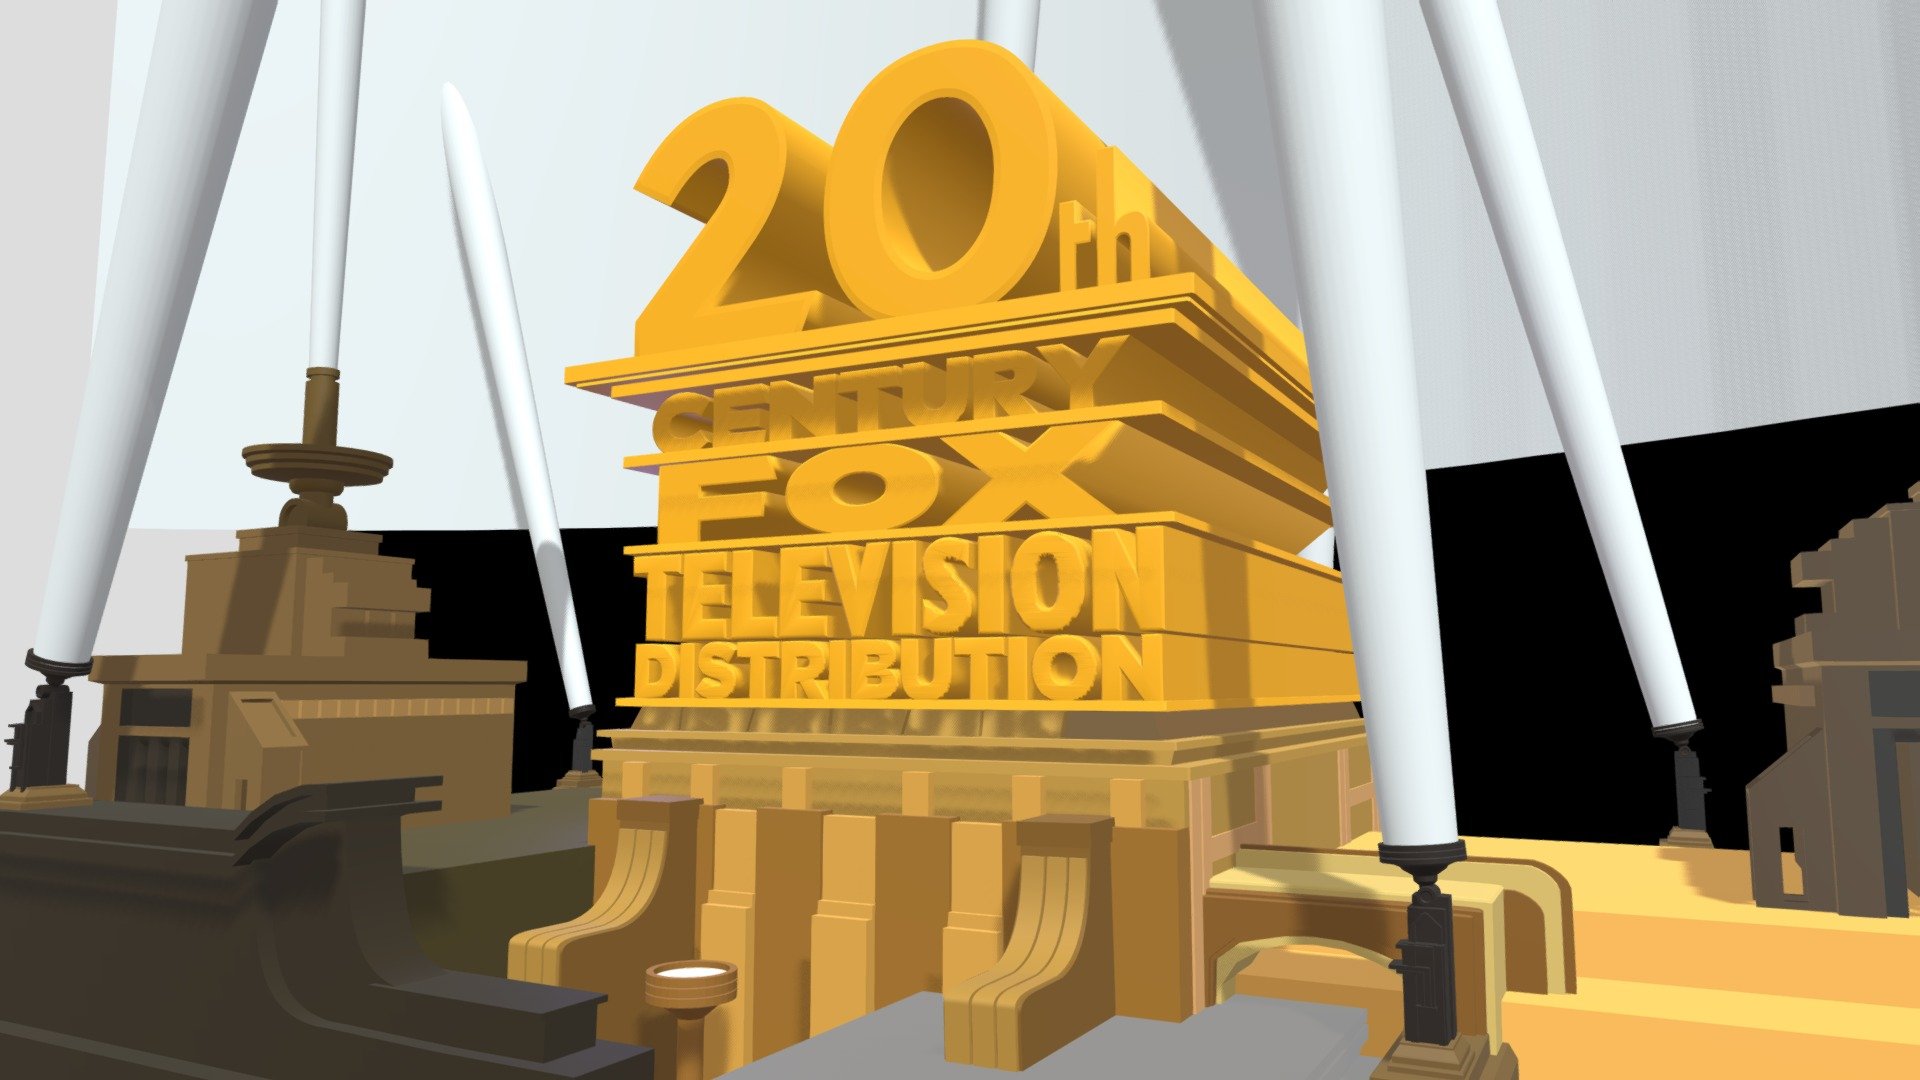 20th Century Fox Television Distribution 3d Model By